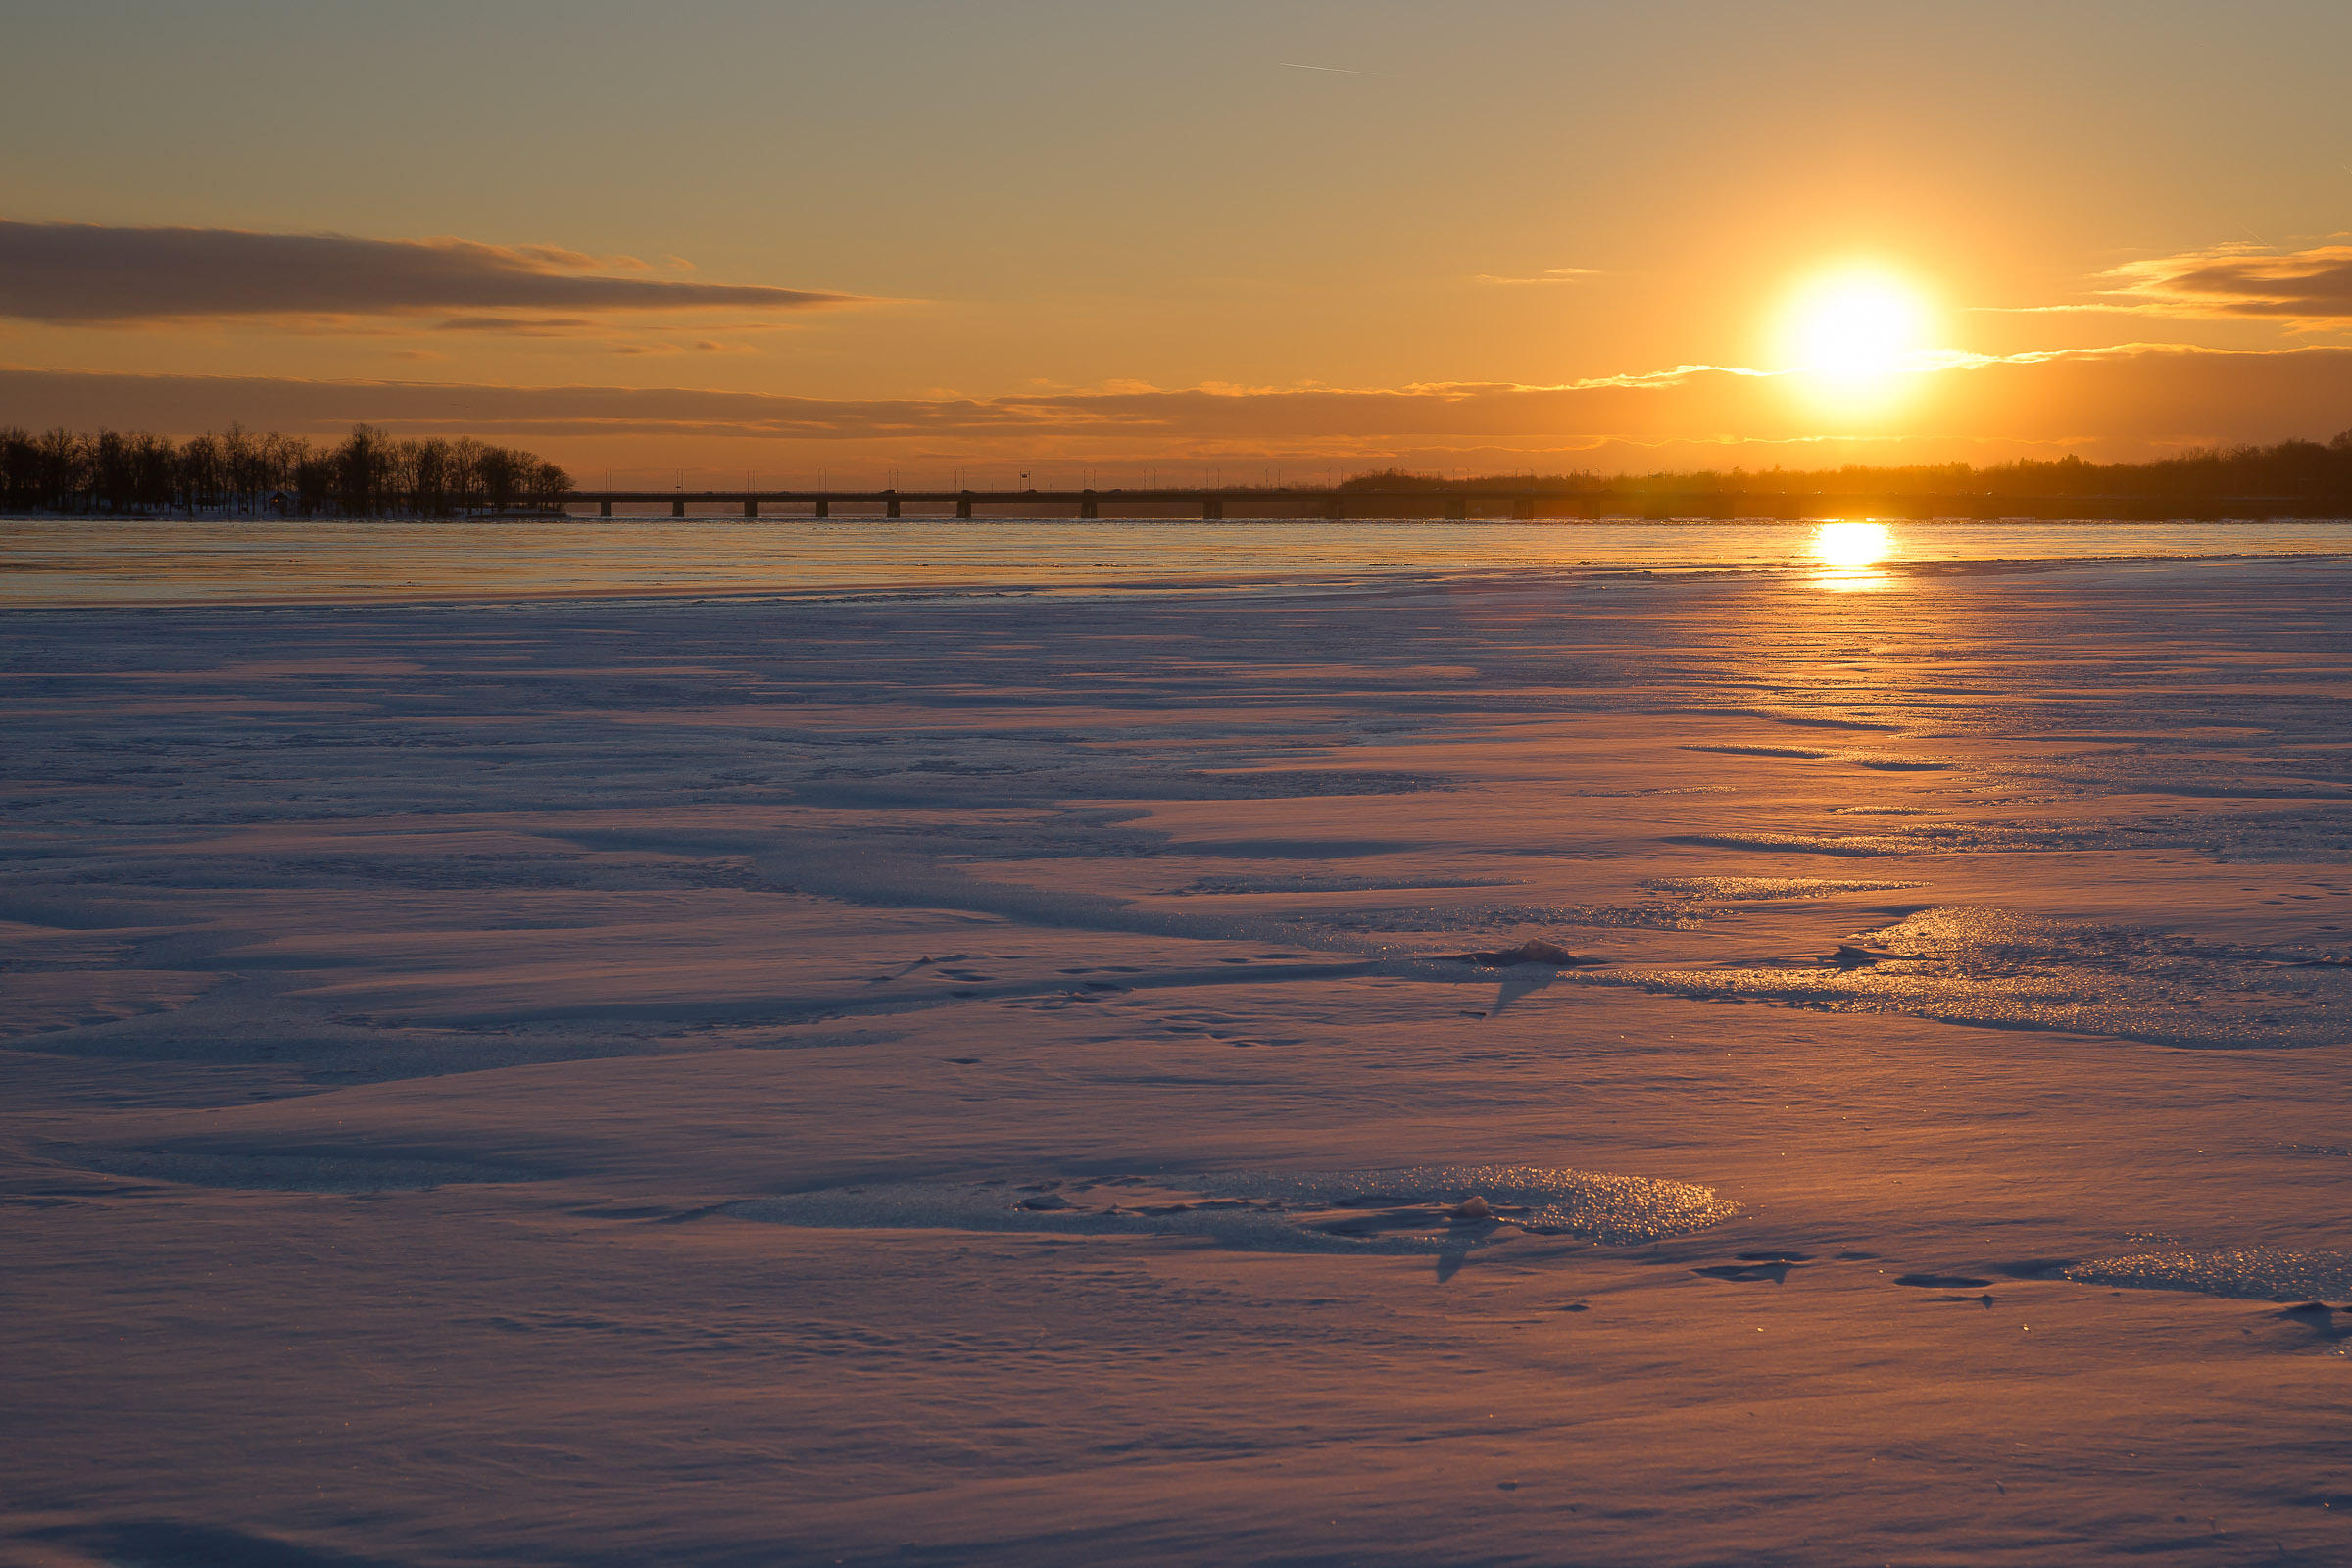 21 janvier : froid intense et soleil couchant sur lOutaouais / January 21st: deep cold and sunset on the Ottawa River